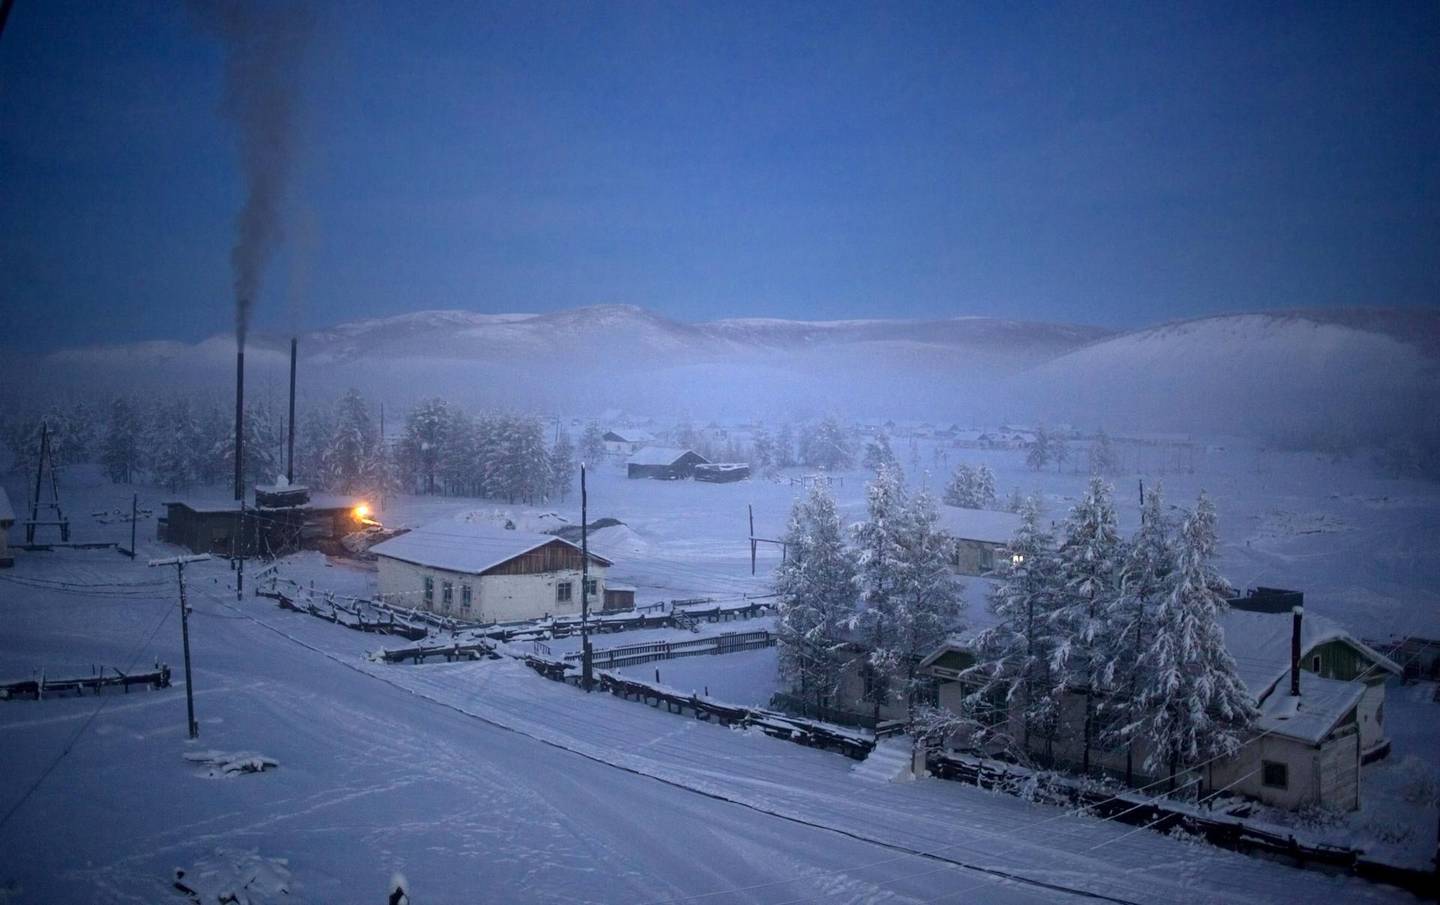 Mandatory Credit: Photo by Amos Chapple/Shutterstock (2087439d)
Oymakon village at dawn with a plume of smoke rising from the heating plant
Village of Oymyakon, which is considered to be the coldest permanently inhabited settlement in the world, Russia - Jan 2013
*Full story: http://www.rexfeatures.com/nanolink/jpod 
If you thought it was cold where you are at the moment then a visit to the Russian village of Oymyakon and city of Yatutsk might just change your mind. With the average temperature for January a blisteringly cold -50c it is no wonder Oymyakon is the coldest permanently inhabited settlement in the world. Oymyakon lies a two day drive from the city of Yakutsk, the regional capital, which has the coldest winter temperatures for any city in the world. Ironically, Oymyakon actually means "non-freezing water" due to a nearby hot spring. The village was originally a stopover for reindeer herders who would water their flocks from the thermal spring. Known as the "Pole of Cold", the coldest ever temperature recorded in Oymyakon was a mind numbing -71.2c. This is the lowest recorded temperature for any permanently inhabited location on Earth and the lowest temperature recorded in the Northern Hemisphere.